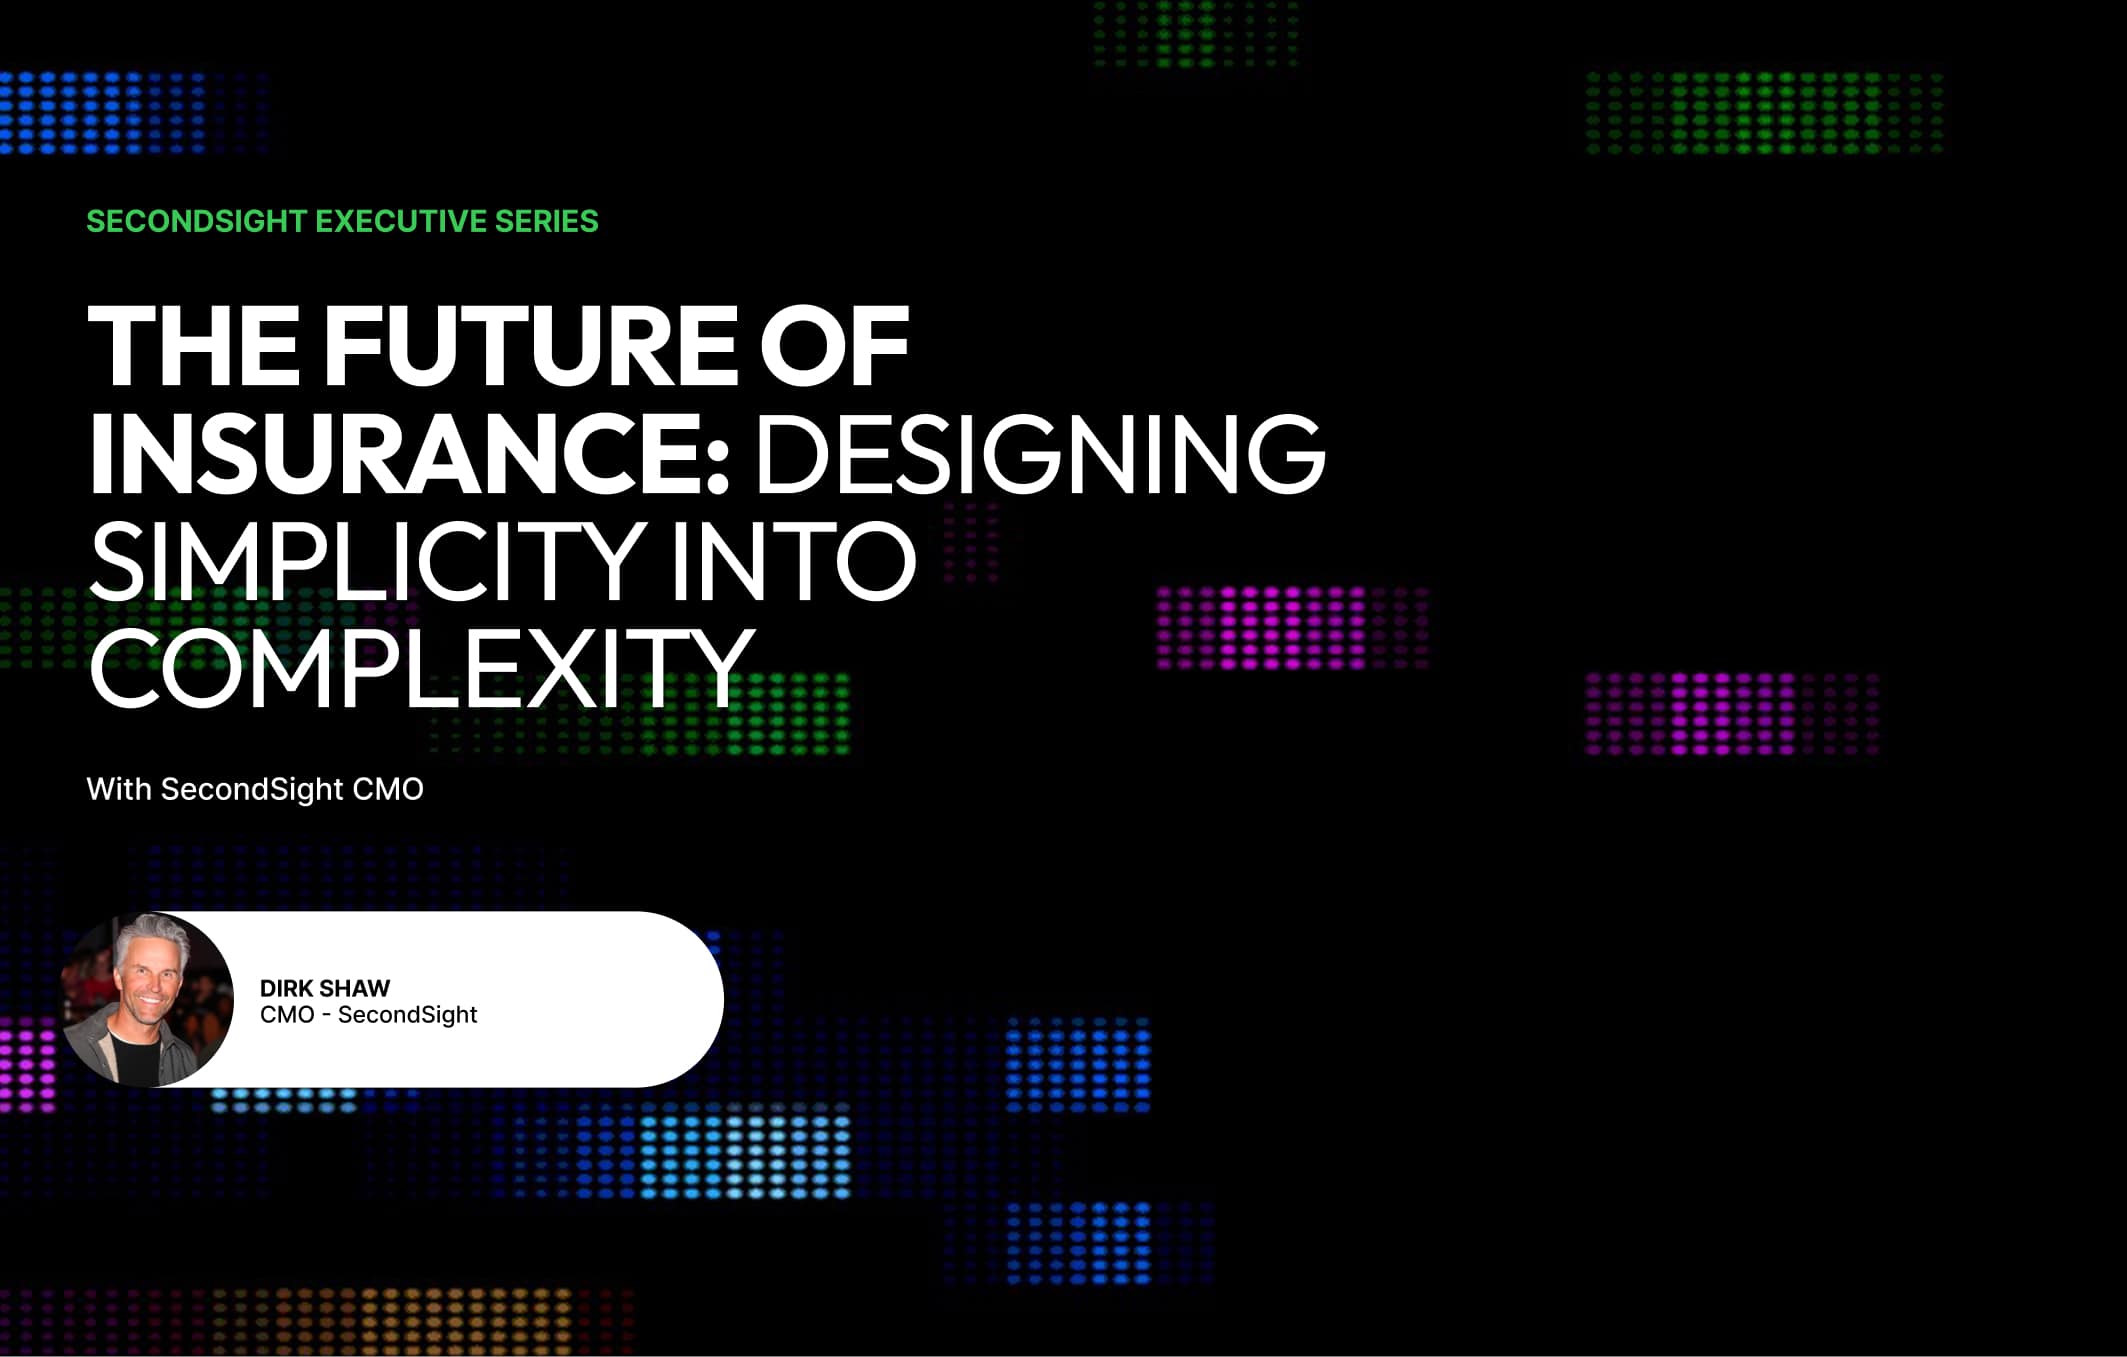 The Future of Insurance: Designing Simplicity into Complexity